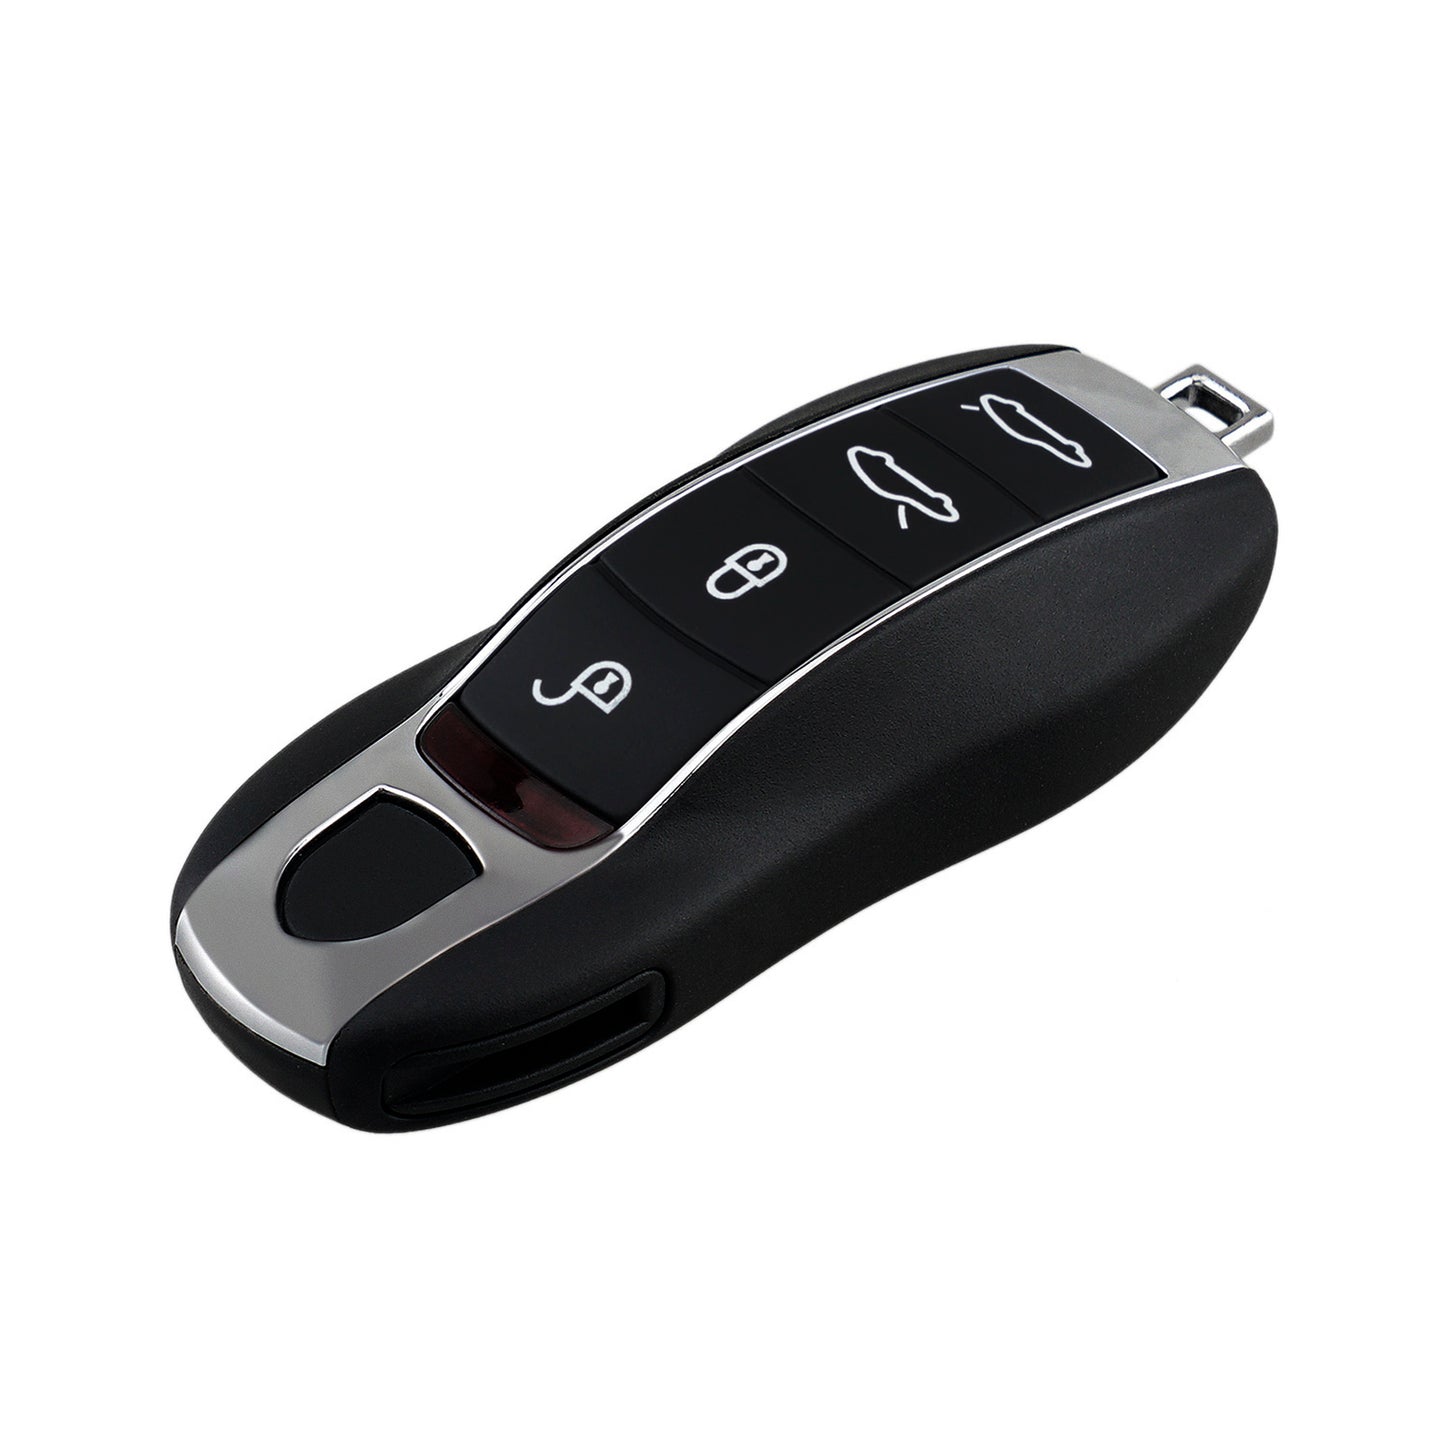 4 Buttons 315MHz Keyless Entry Fob Remote Car Key For 2010-2018 Porsche 911 Boxter Cayenne Macan Panamera FCC ID: KR55WK50138 SKU : J469